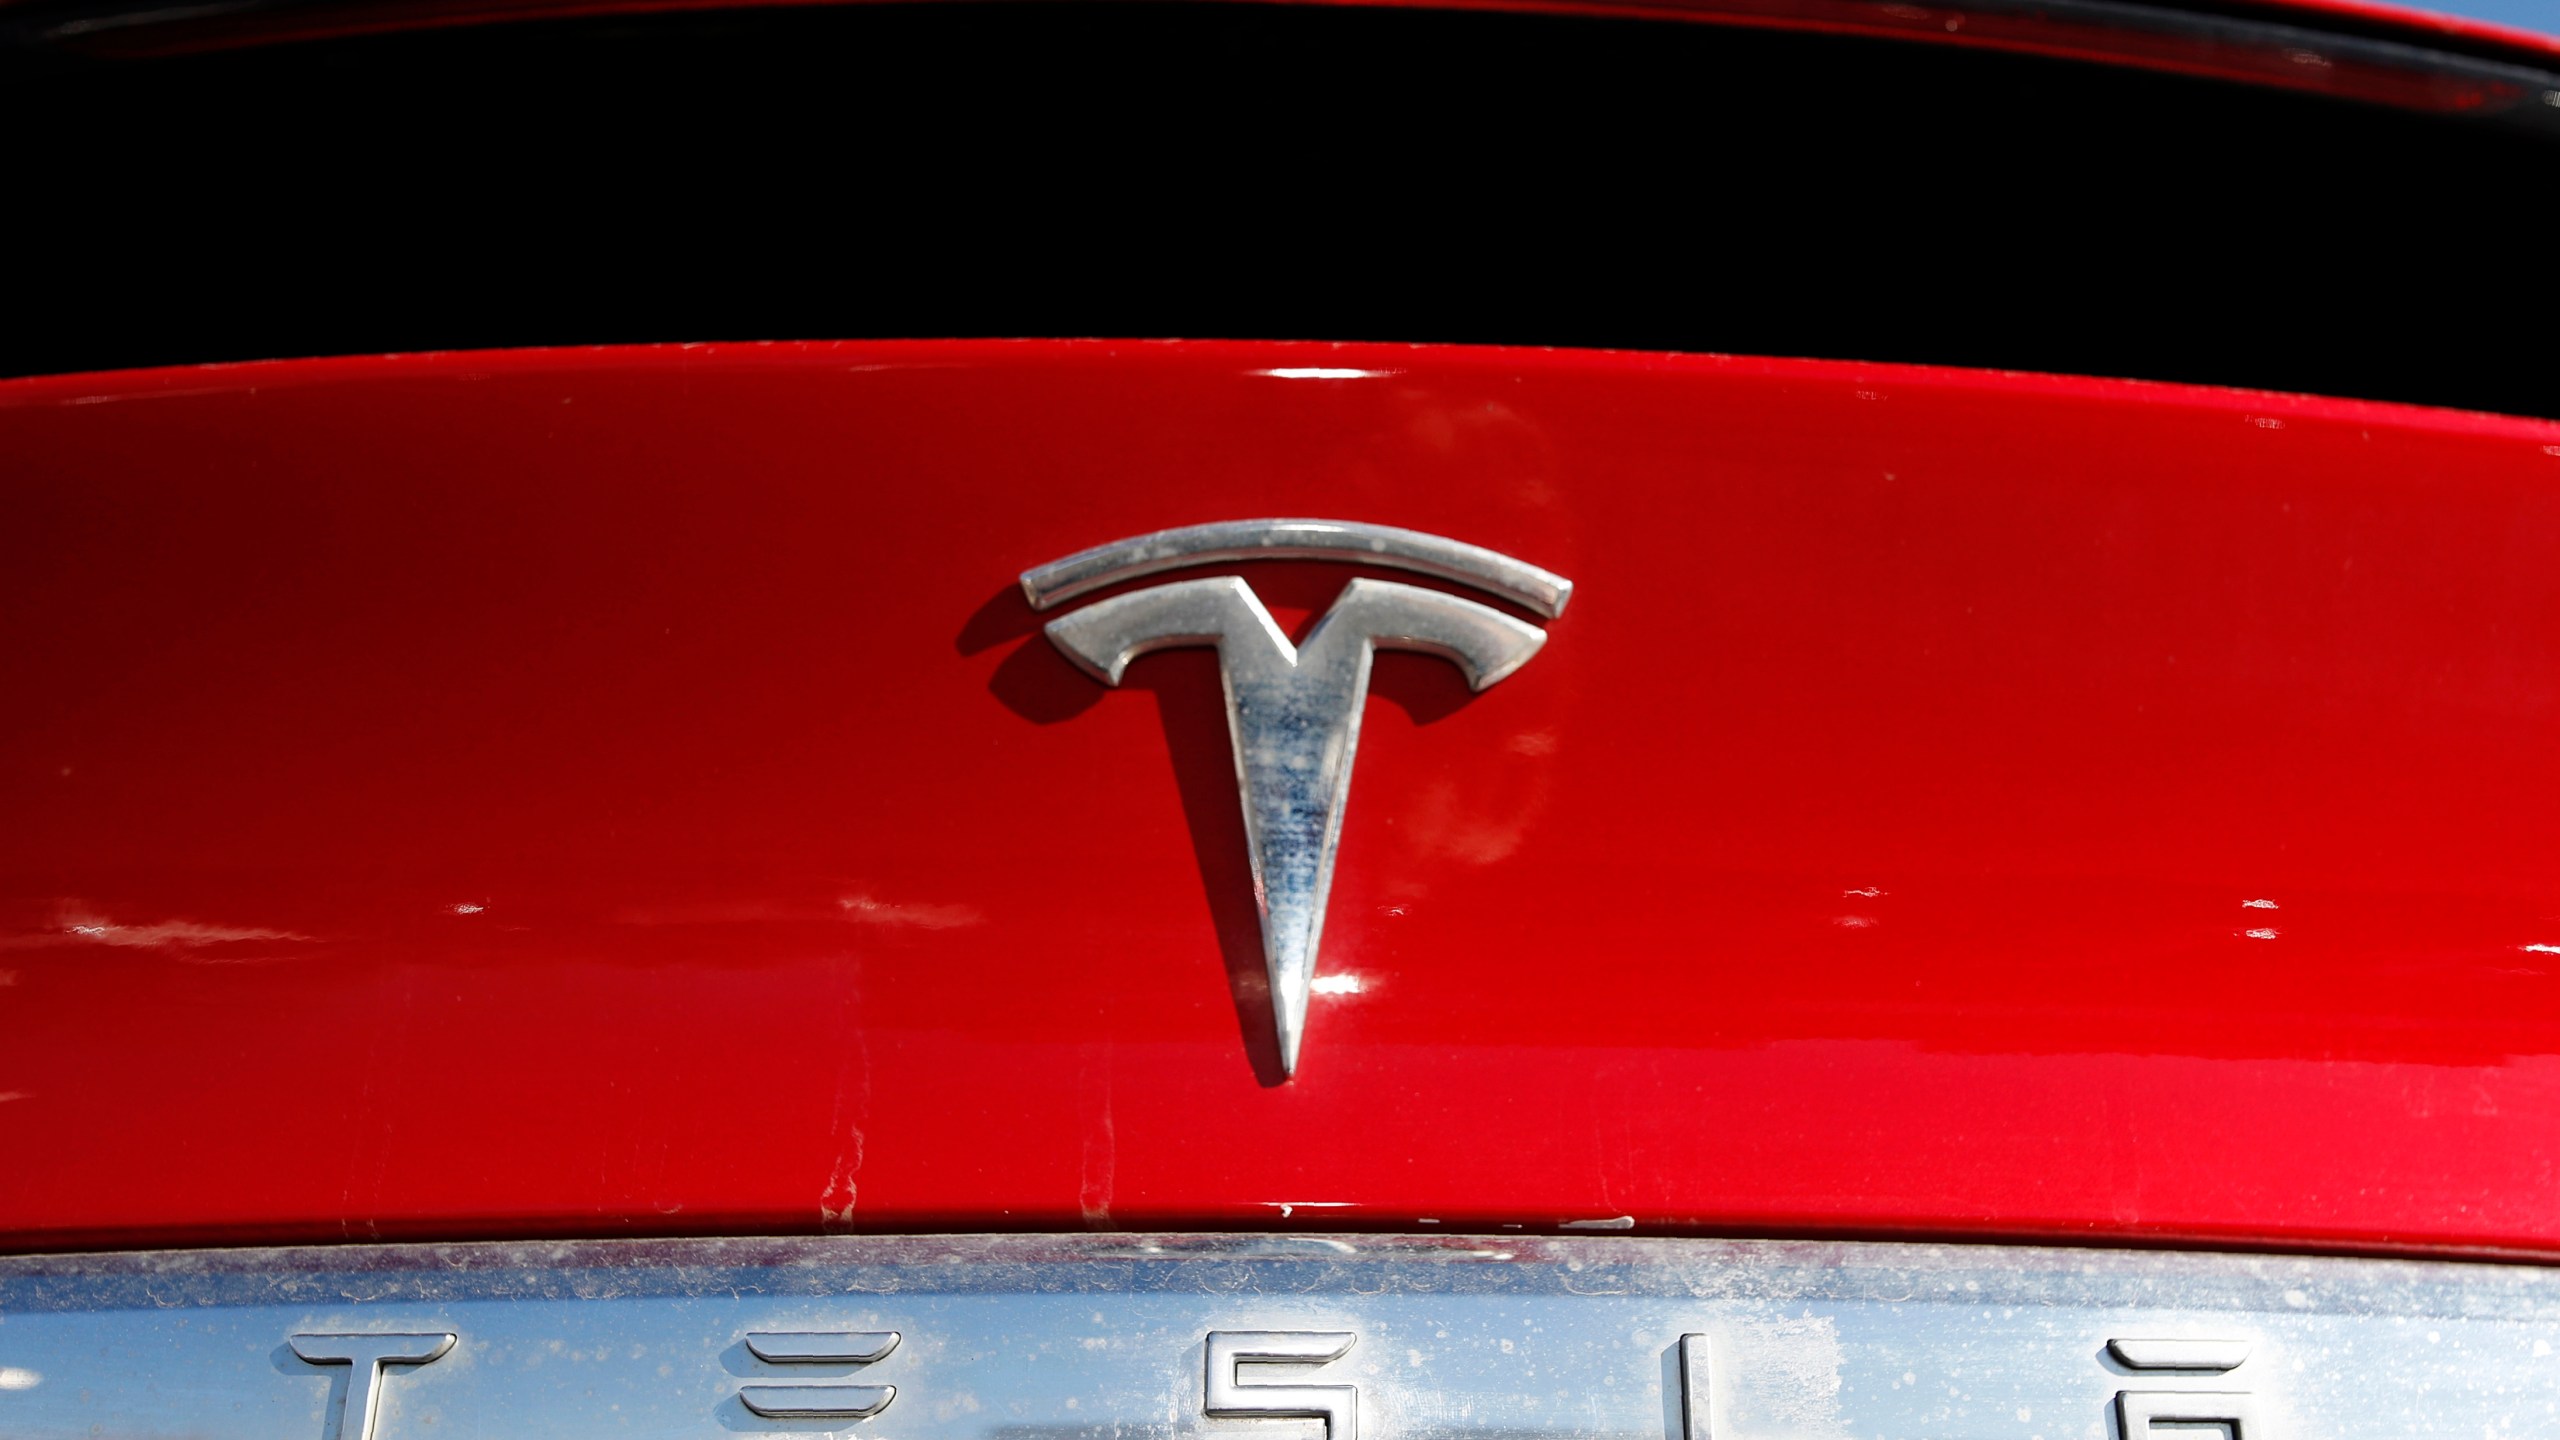 FILE - The Tesla logo appears on an unsold 2020 Model X at a dealership, Feb. 2, 2020, in Littleton, Colo. Tesla's second-quarter net income fell 45% compared with a year ago as the company's global electric vehicle sales tumbled despite price cuts and low-interest financing. (AP Photo/David Zalubowski, File)